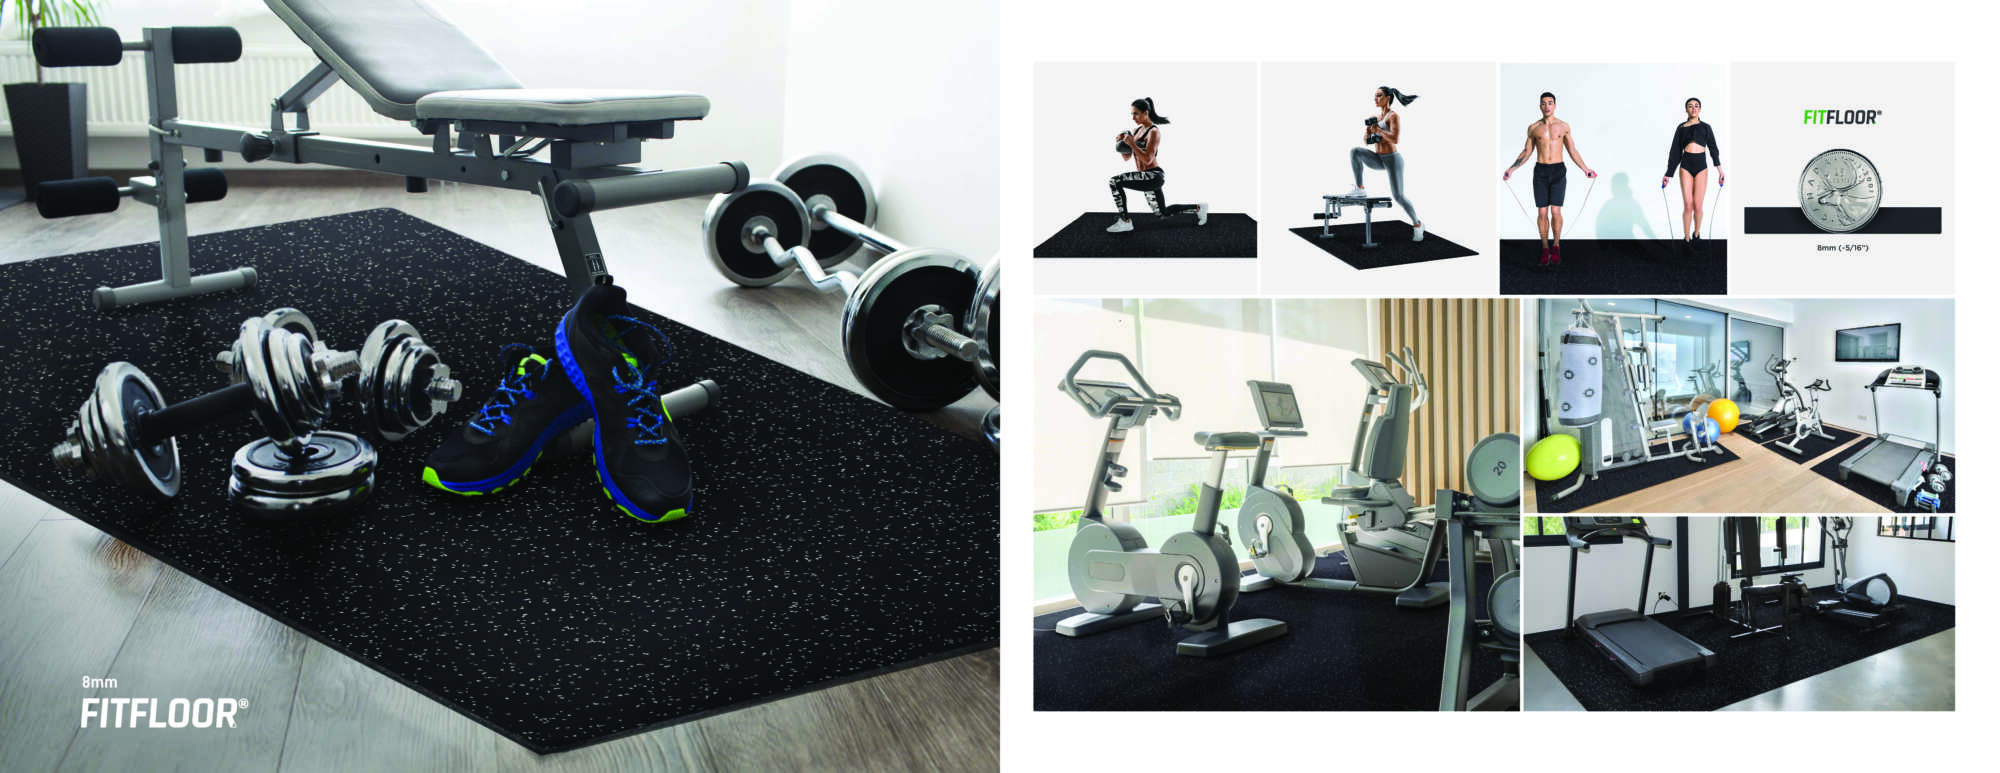 FitFloor - Product Images